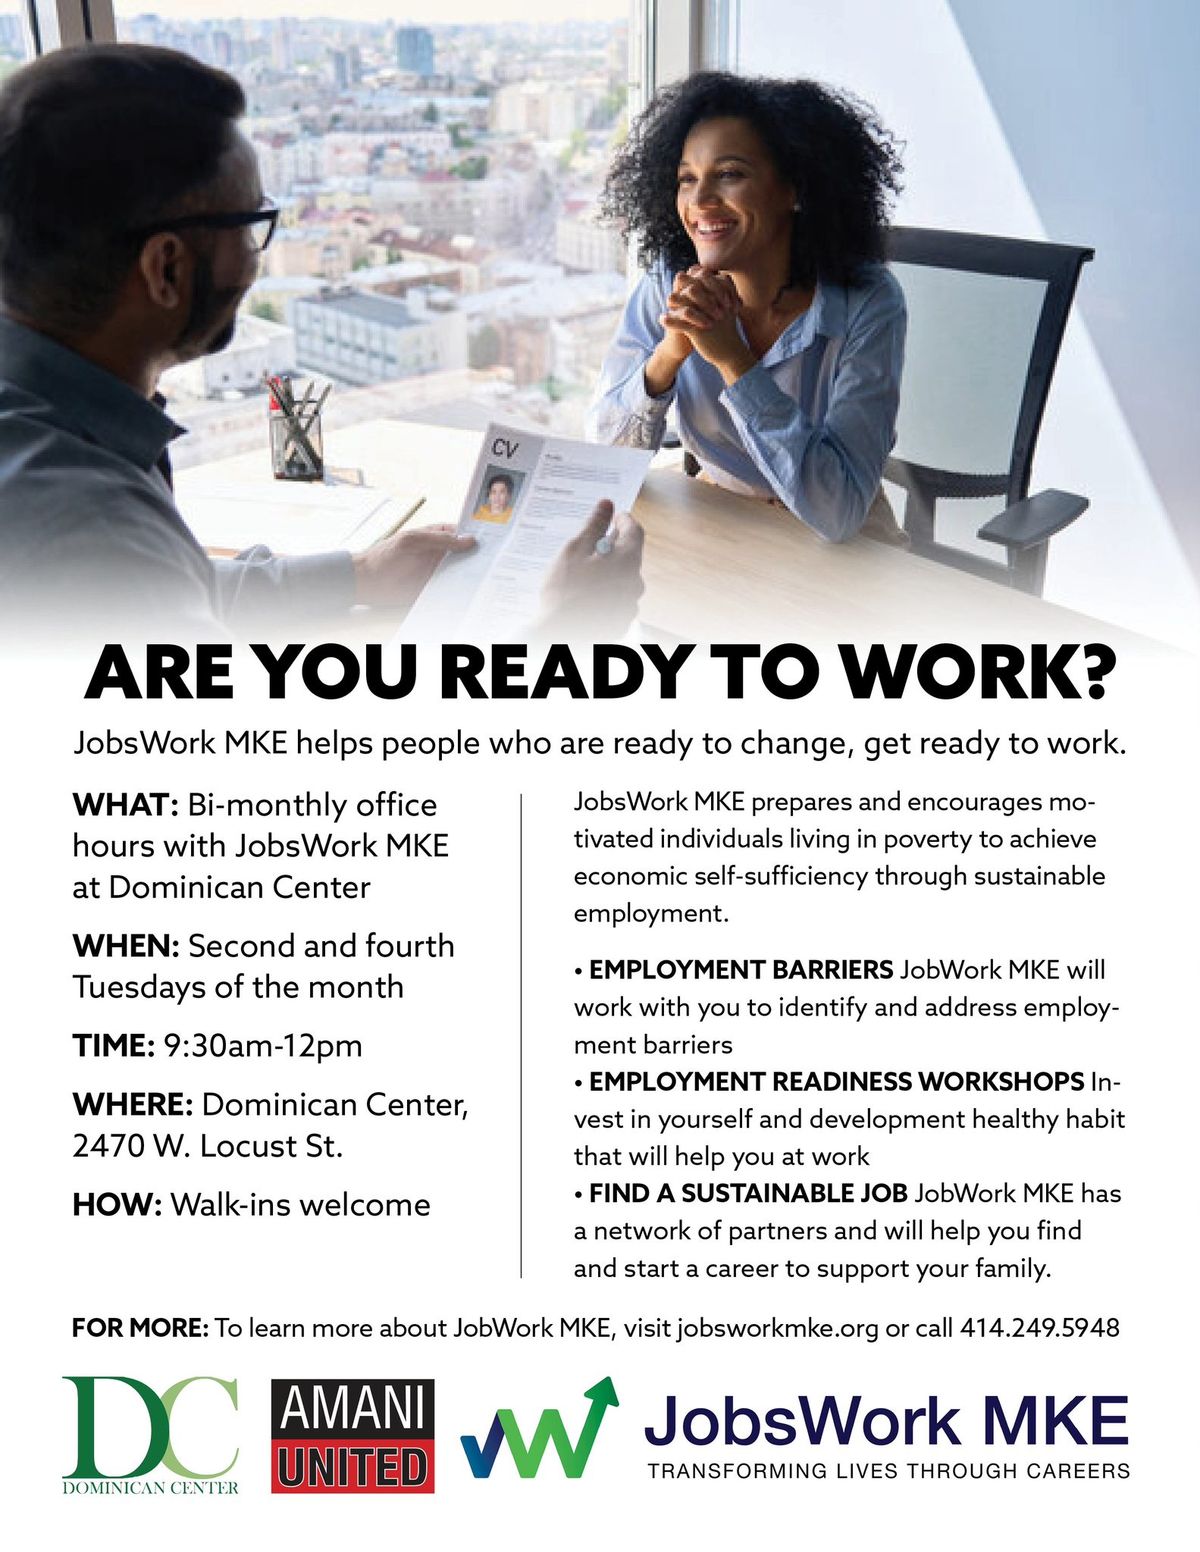 JobsWorks MKE office hours at Dominican Center